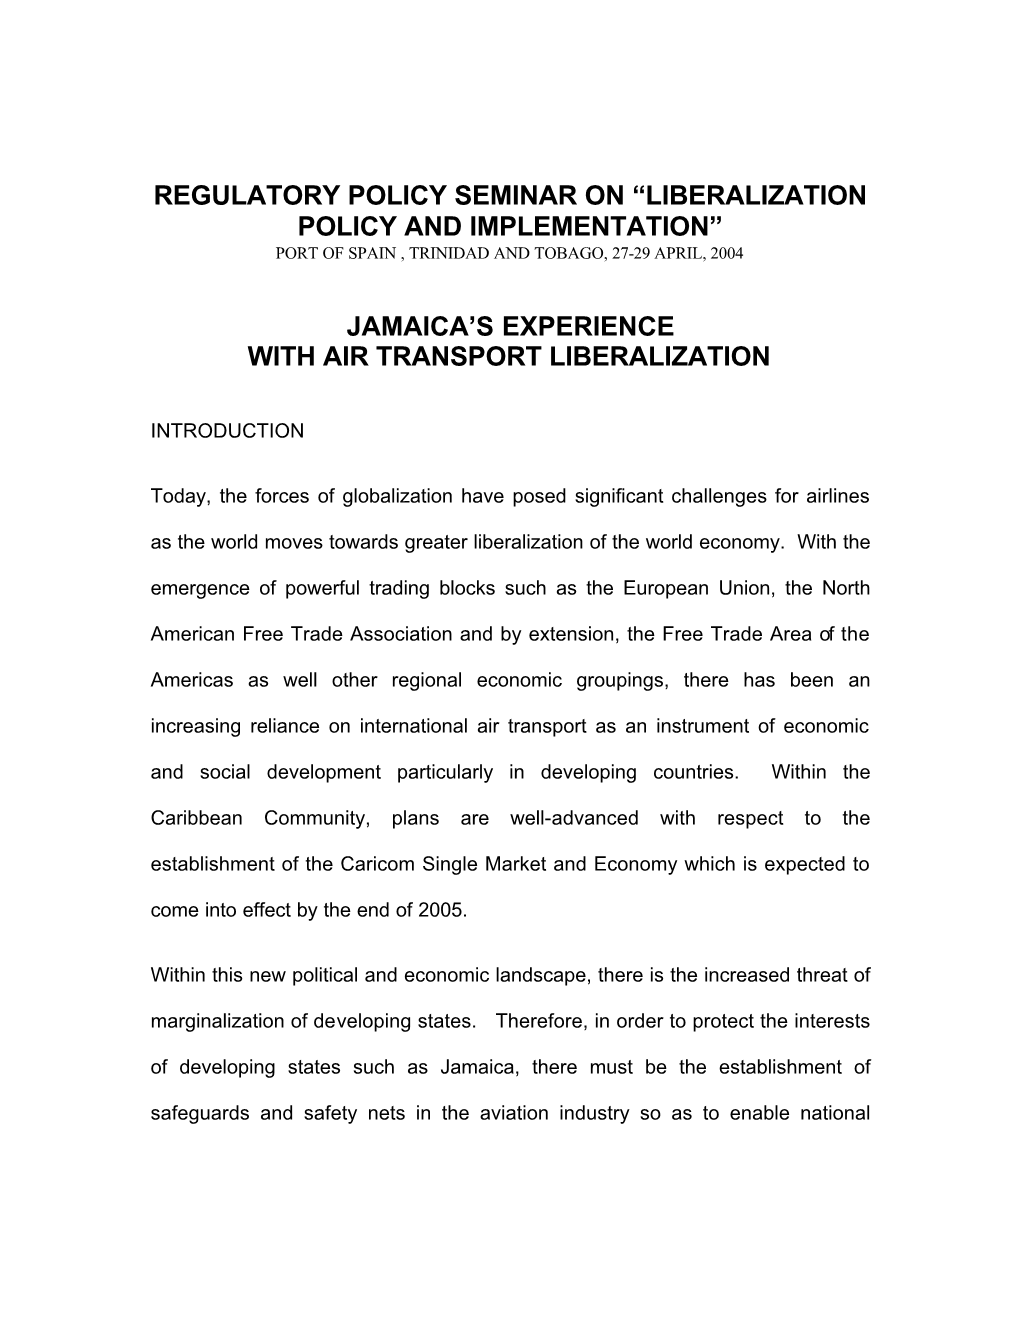 Jamaica's Experience with Air Transport Liberalization